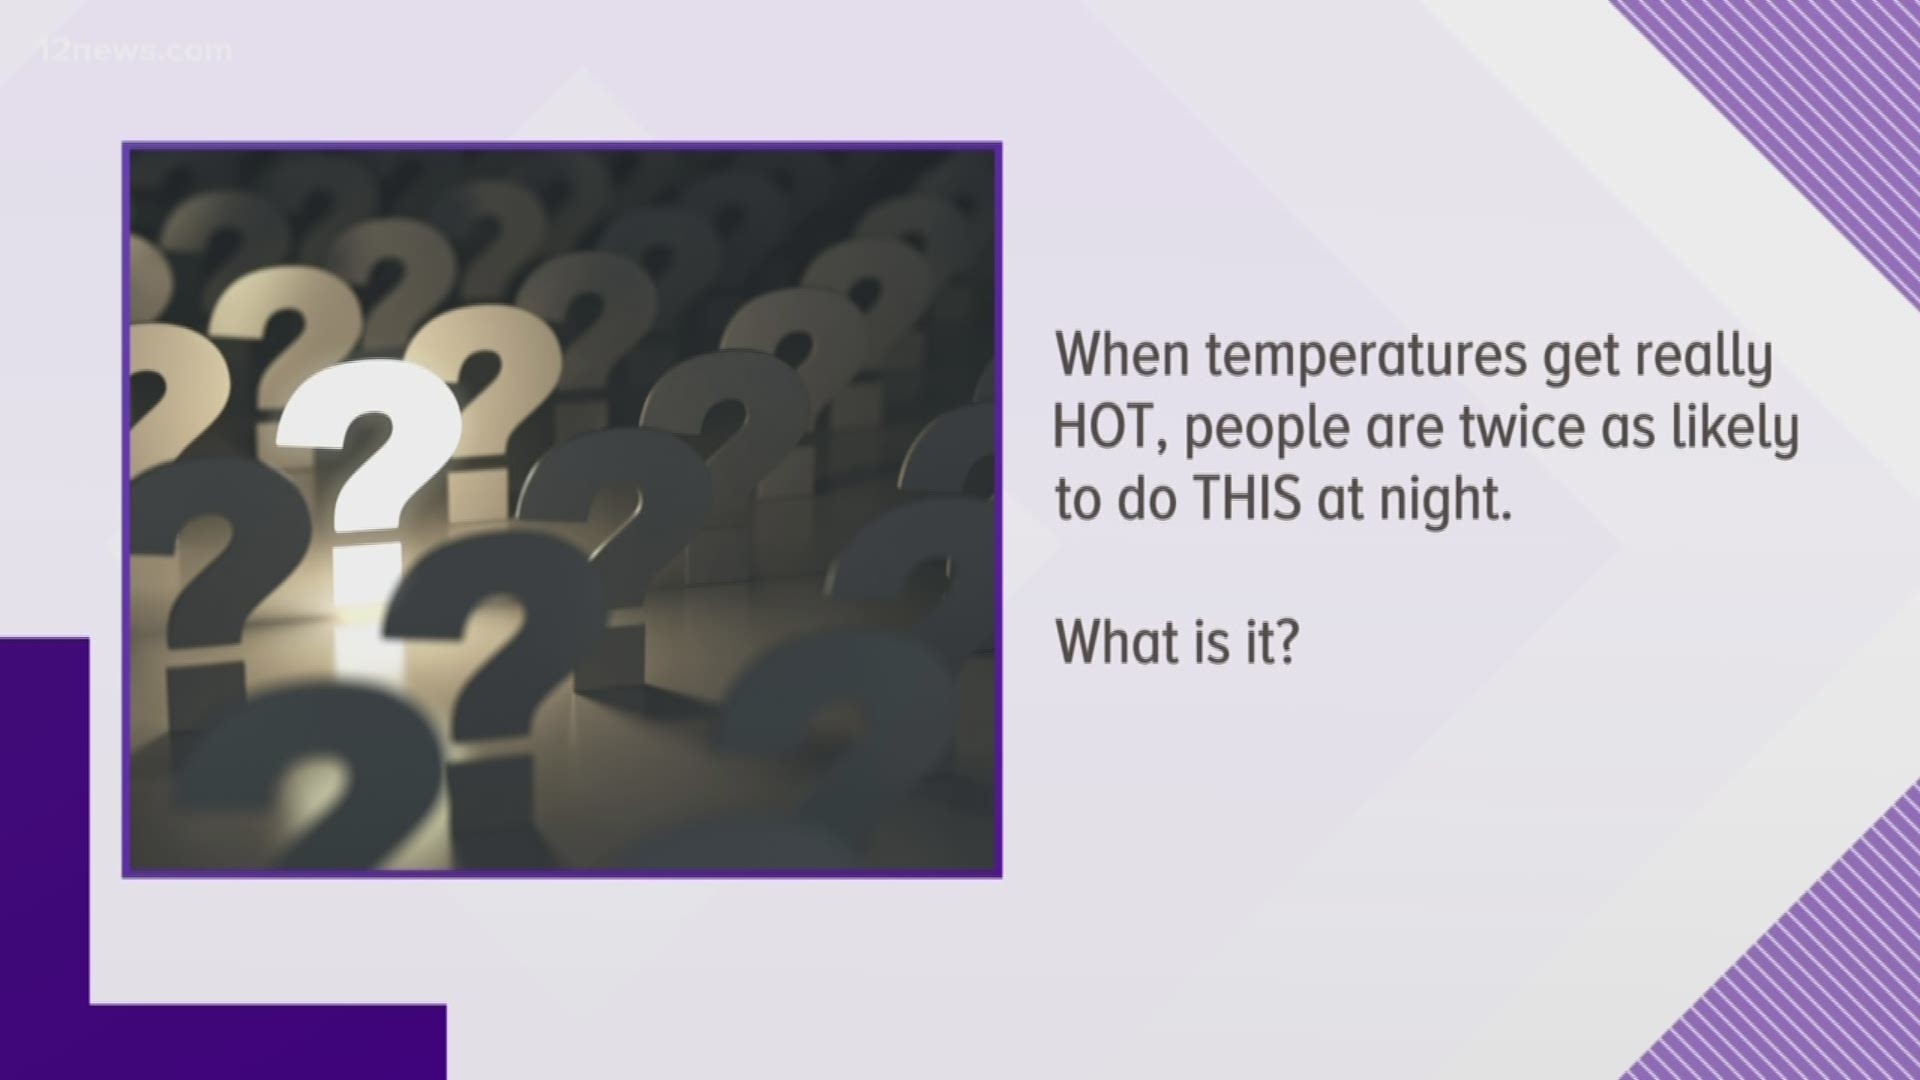 Hotter temps mean people are two times more likely to do what at night?